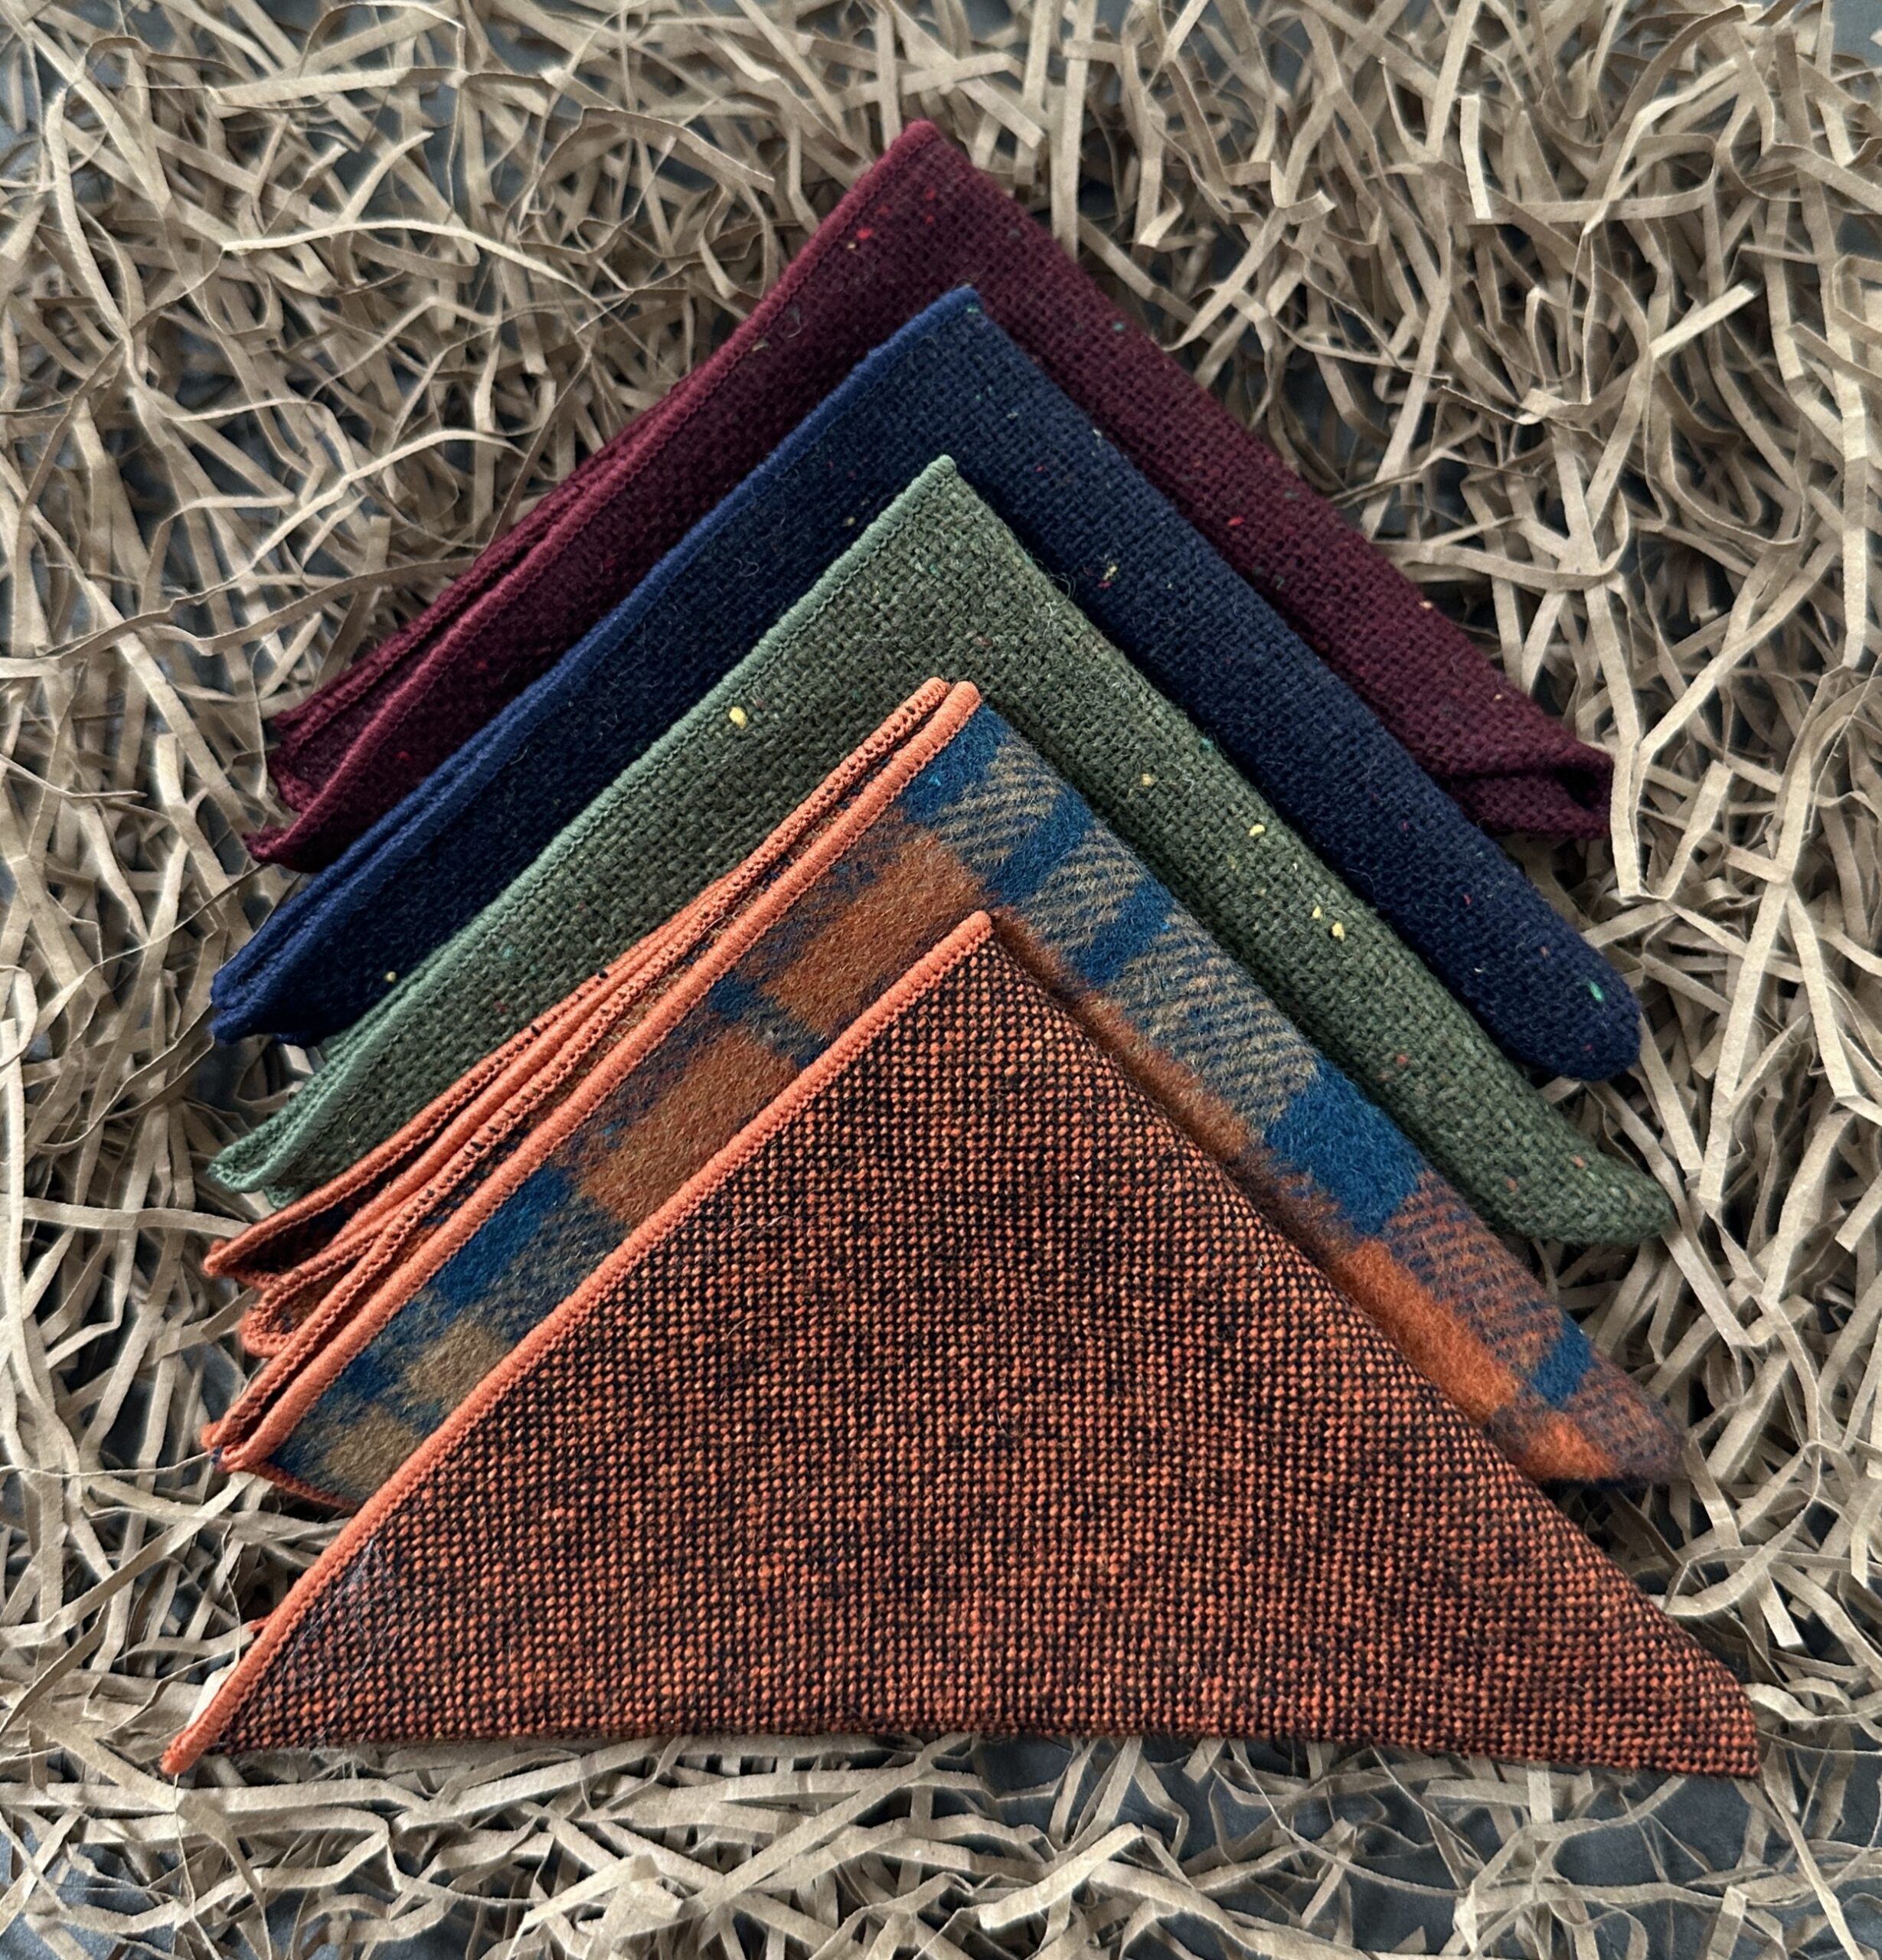 A set of five wool pocket squares in wool for men's gifts, groomsmen gifts and unique best man gifts.